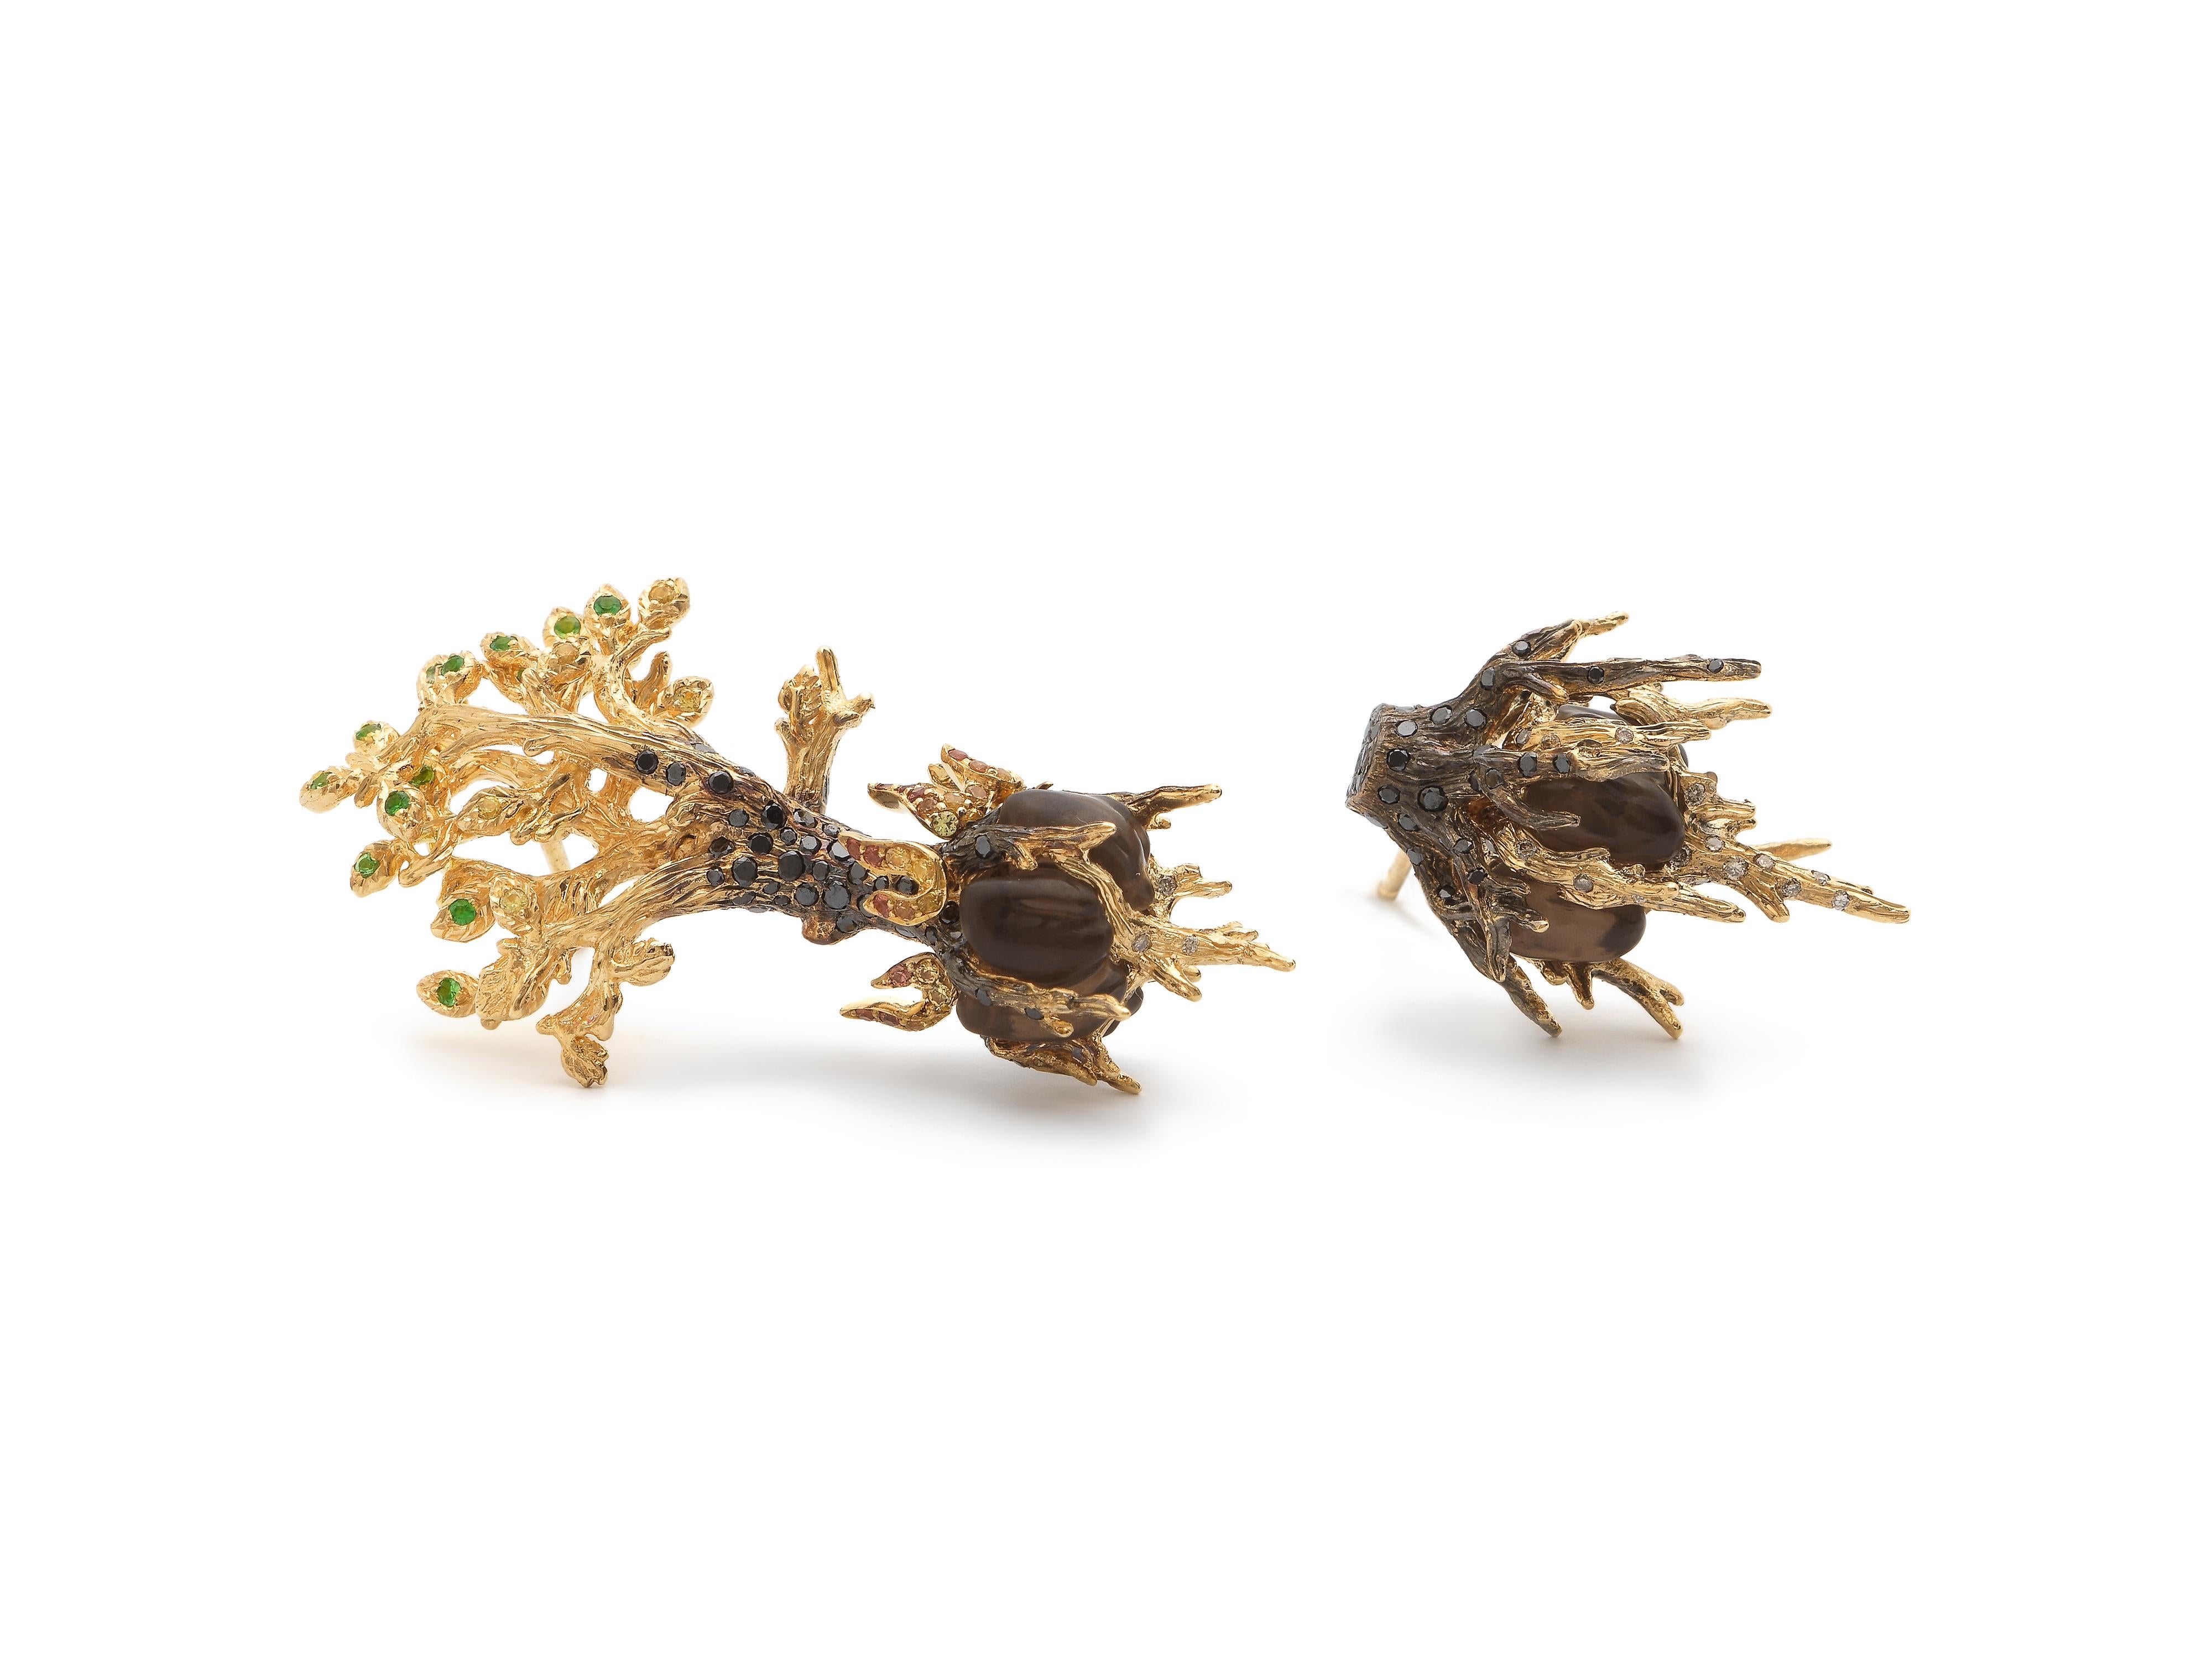 These intricately detailed, asymmetric earrings – one to represent a tree’s branches and the other its roots - are symbolic of the destruction of nature but also its rebirth. The earrings are designed in 18k yellow gold, lent a smoky look with black